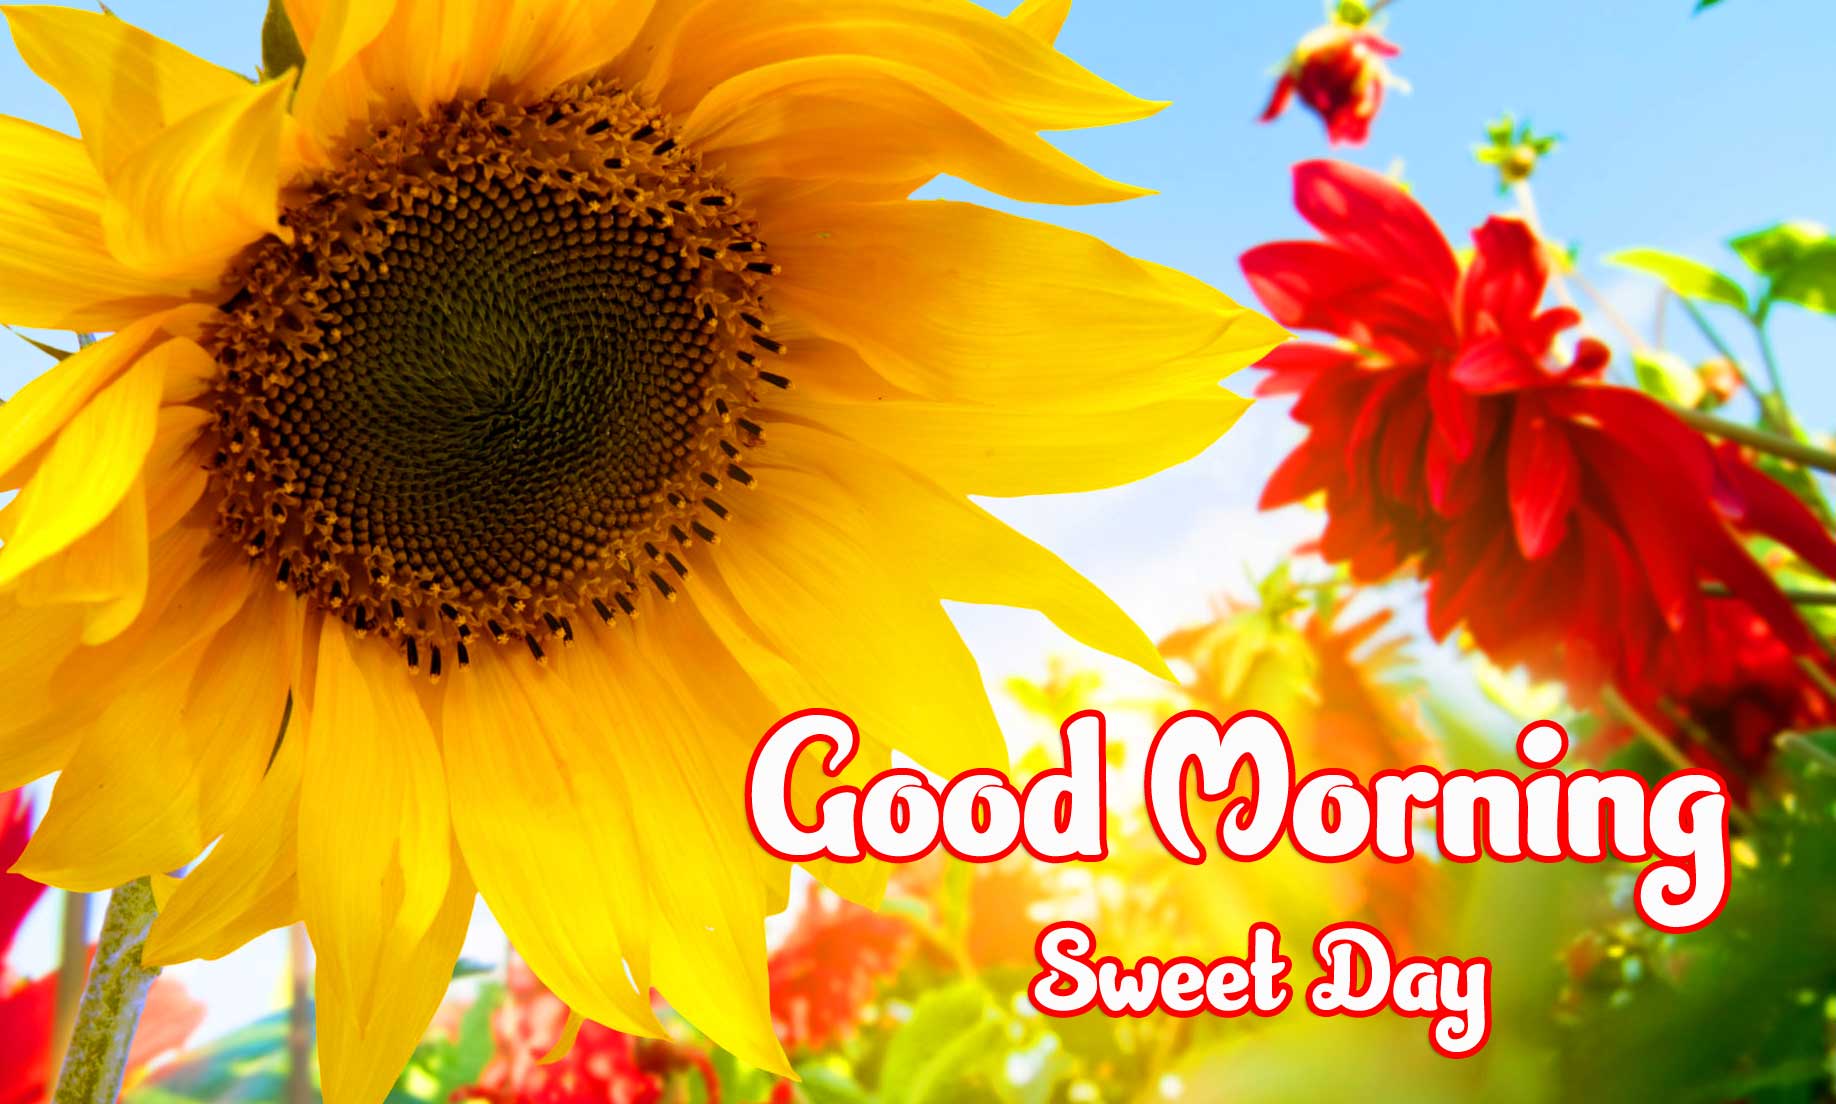 Beautiful Good Morning Wishes Images pics free download